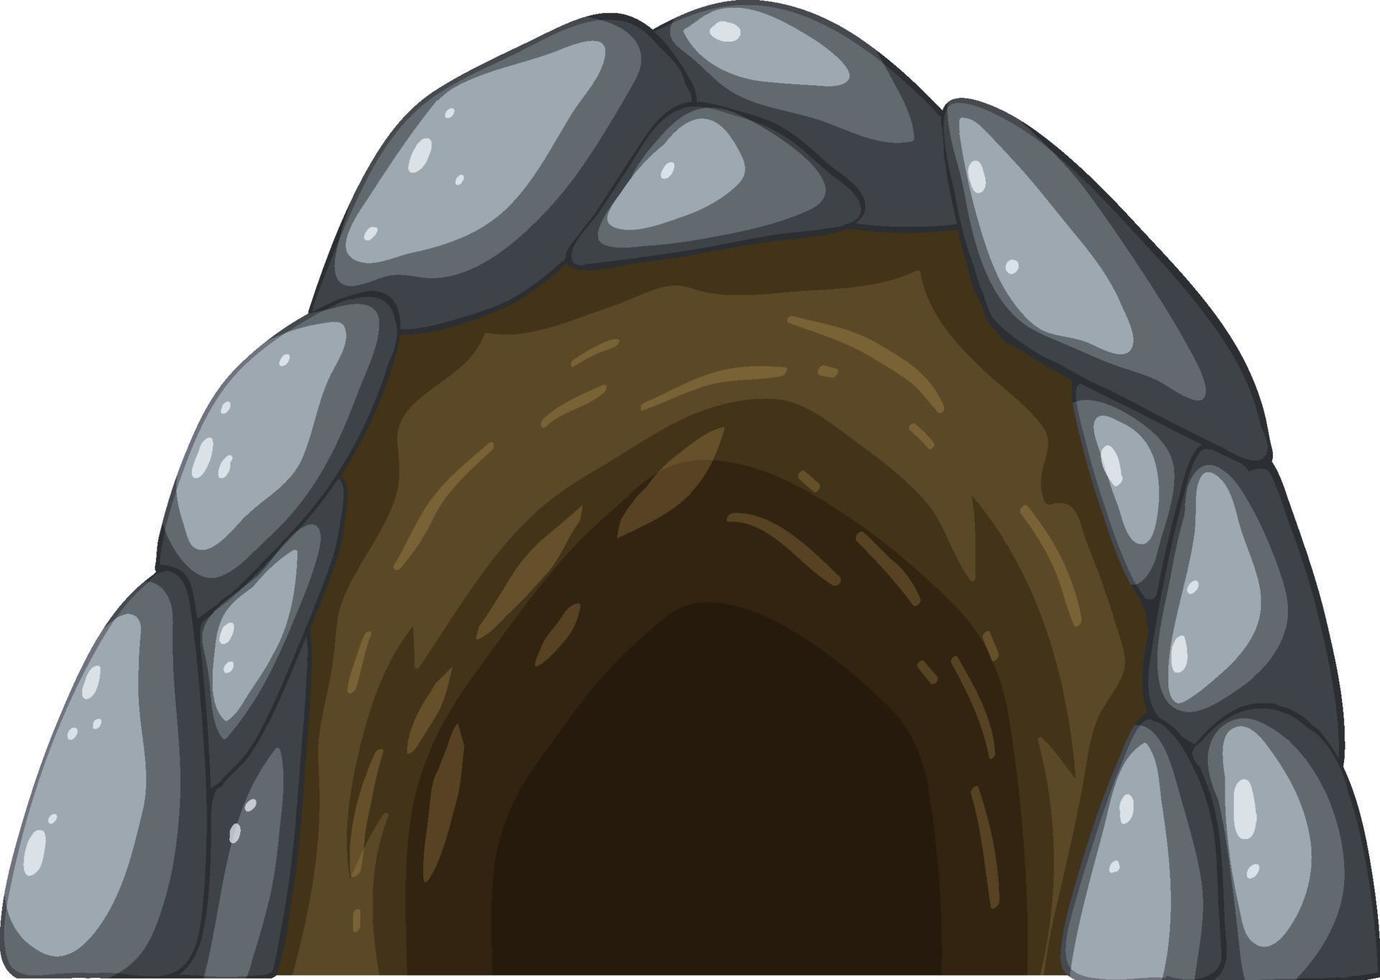 Stone cave in cartoon style vector